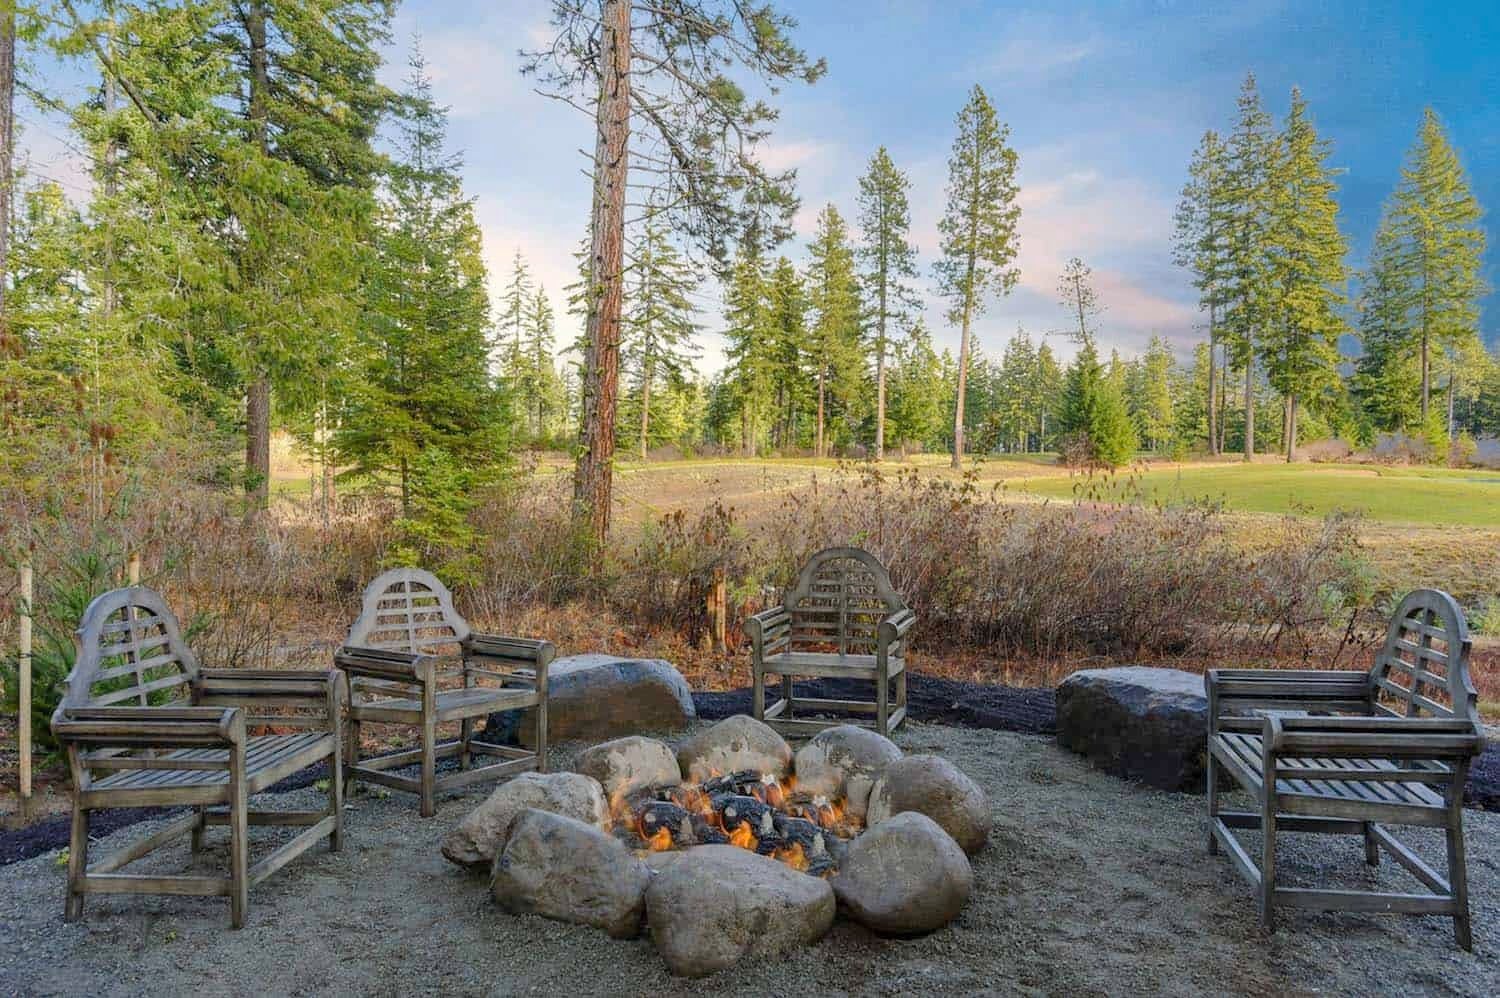 Fire pit outdoor